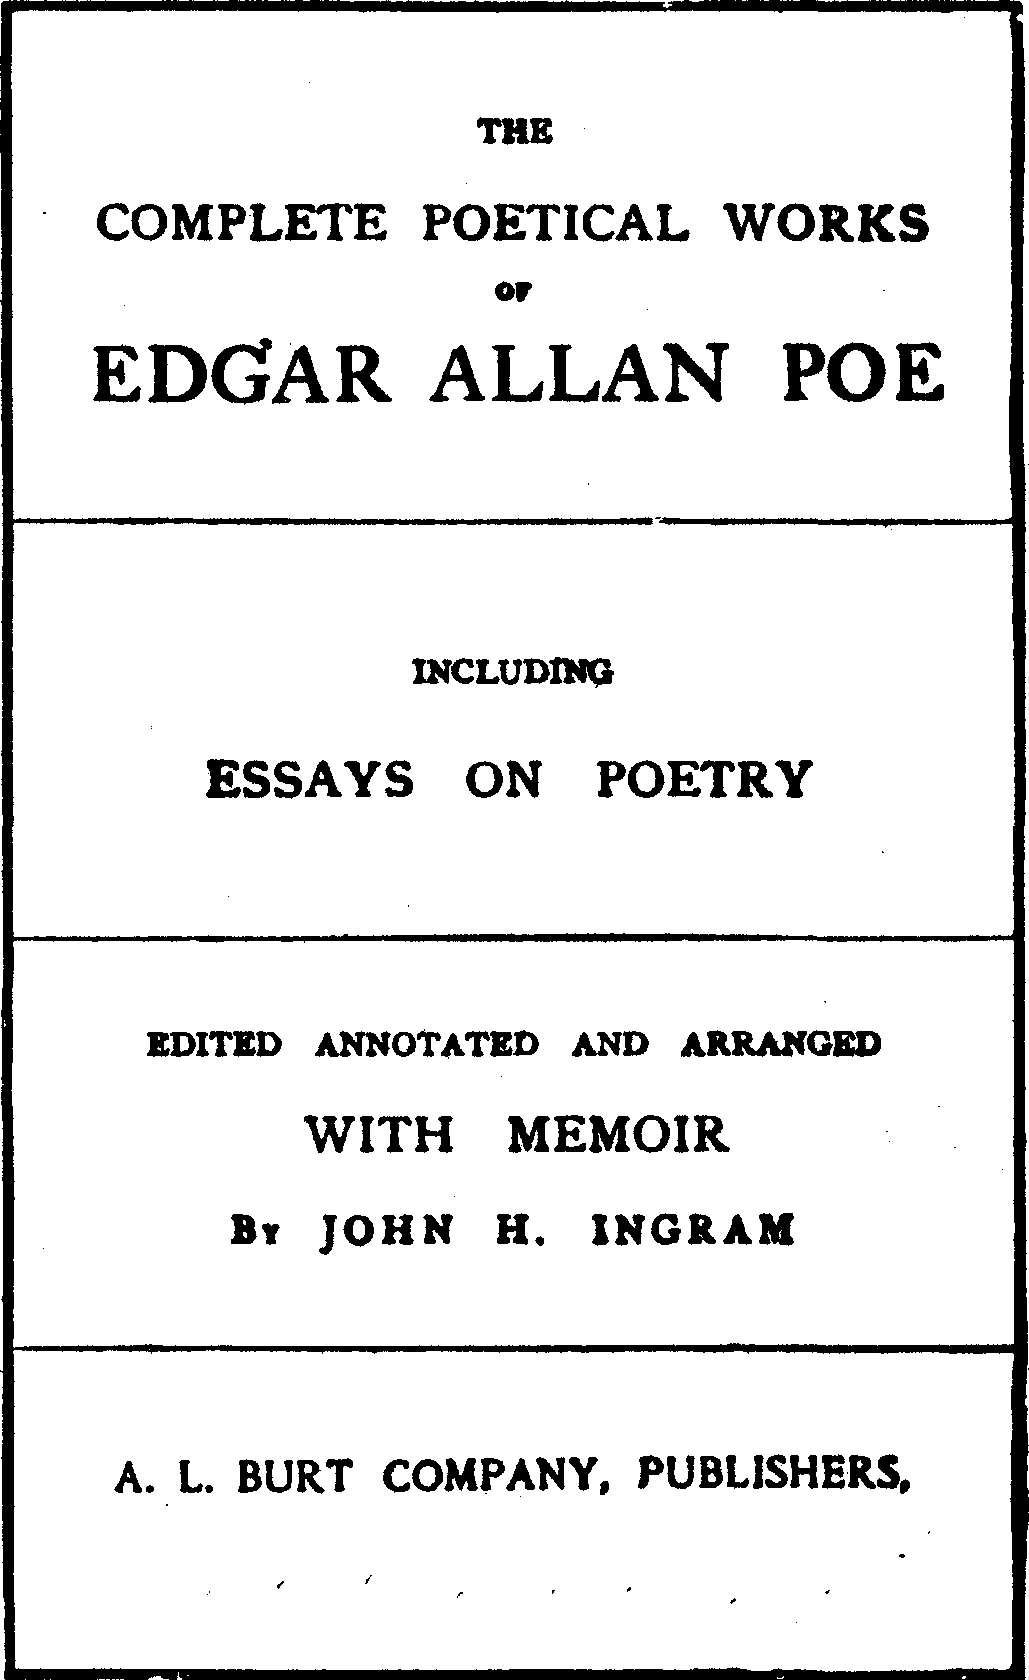 National Edgar Allan Poe Theatre to perform Poe's works Oct. 14 to Nov. 6